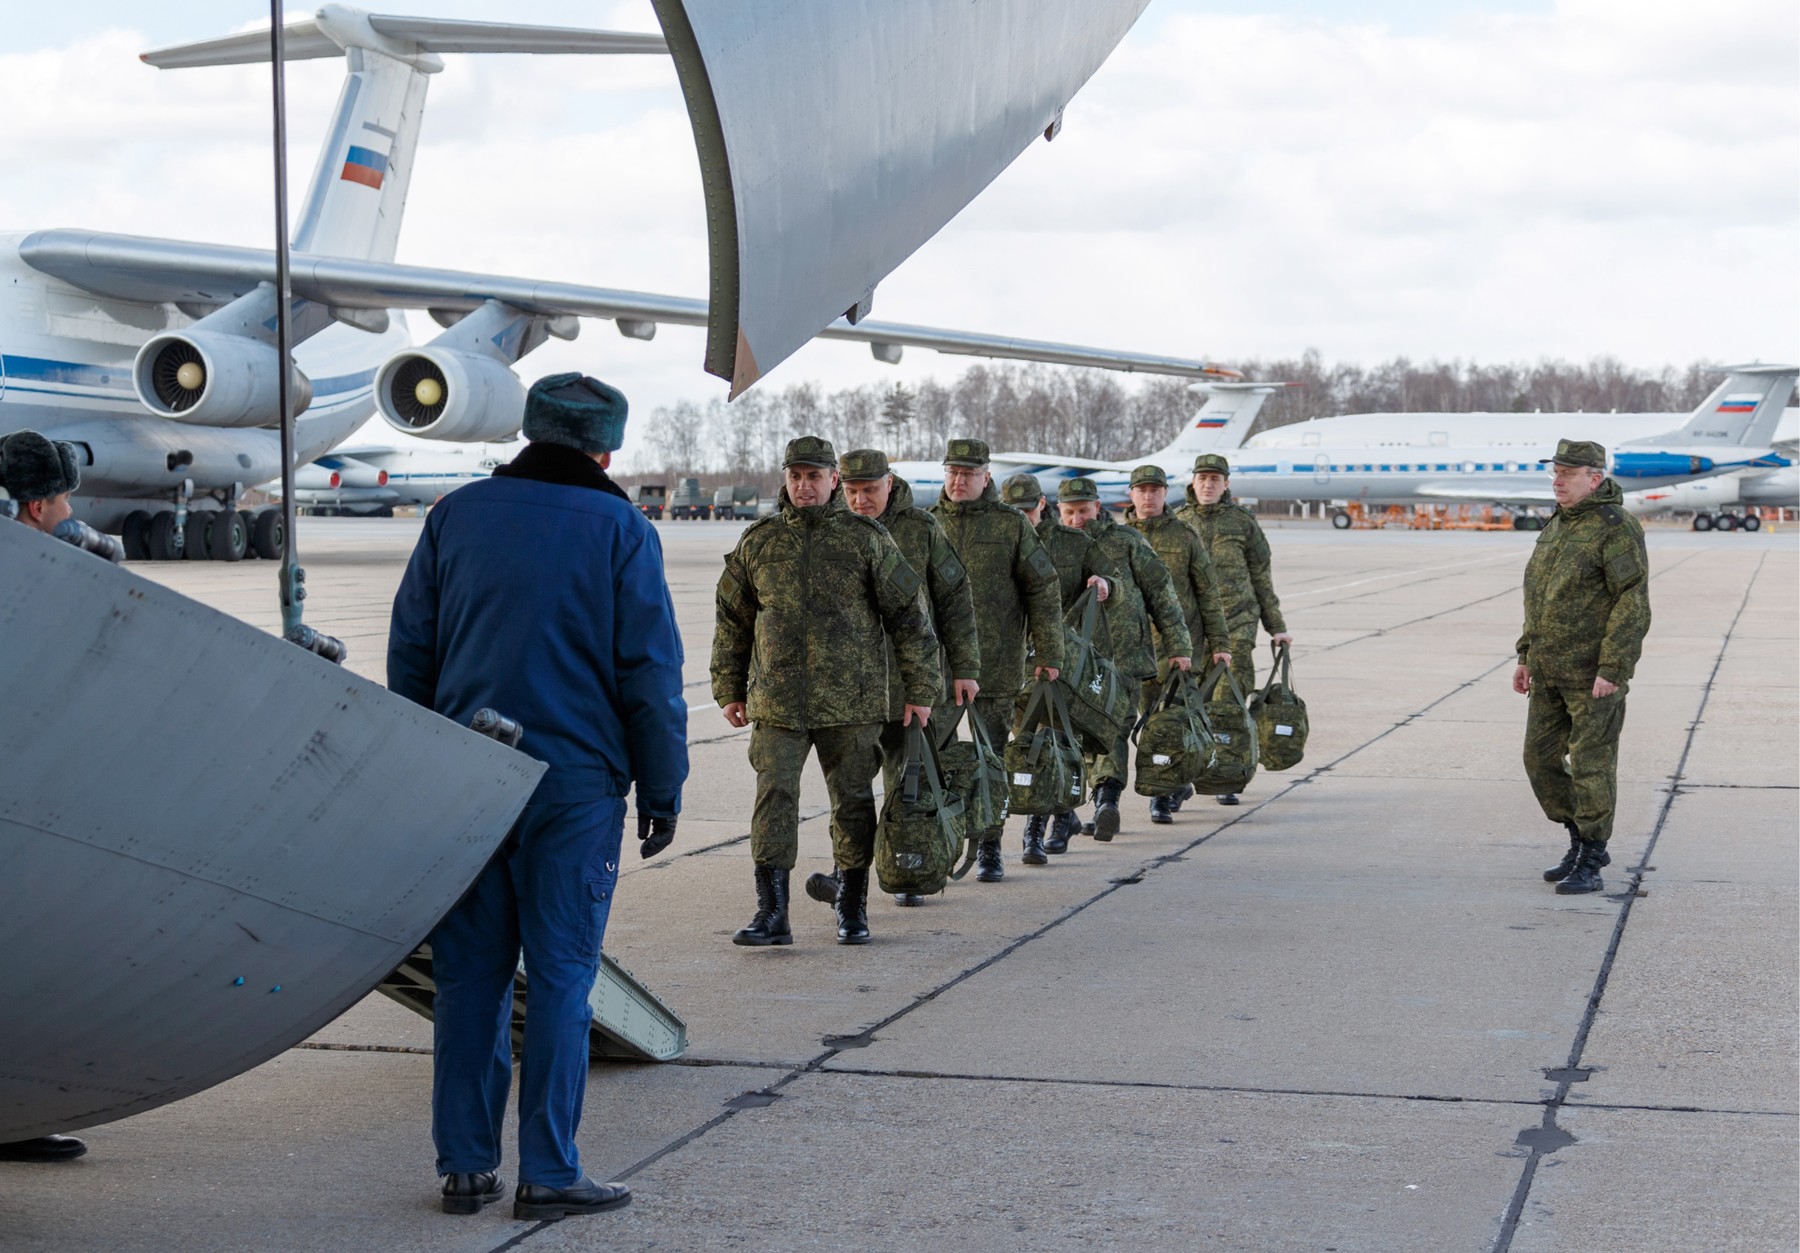 MOSCOW REGION, RUSSIA - MARCH 22, 2020: Loading medical equipment aboard planes of the Russian Aerospace Forces for sending it to the Italian regions worst hit by the COVID-19 coronavirus pandemic. Russian Defence Ministry/TASS, Image: 508484099, License: Rights-managed, Restrictions: , Model Release: no, Credit line: Russian Defence Ministry / TASS / Profimedia